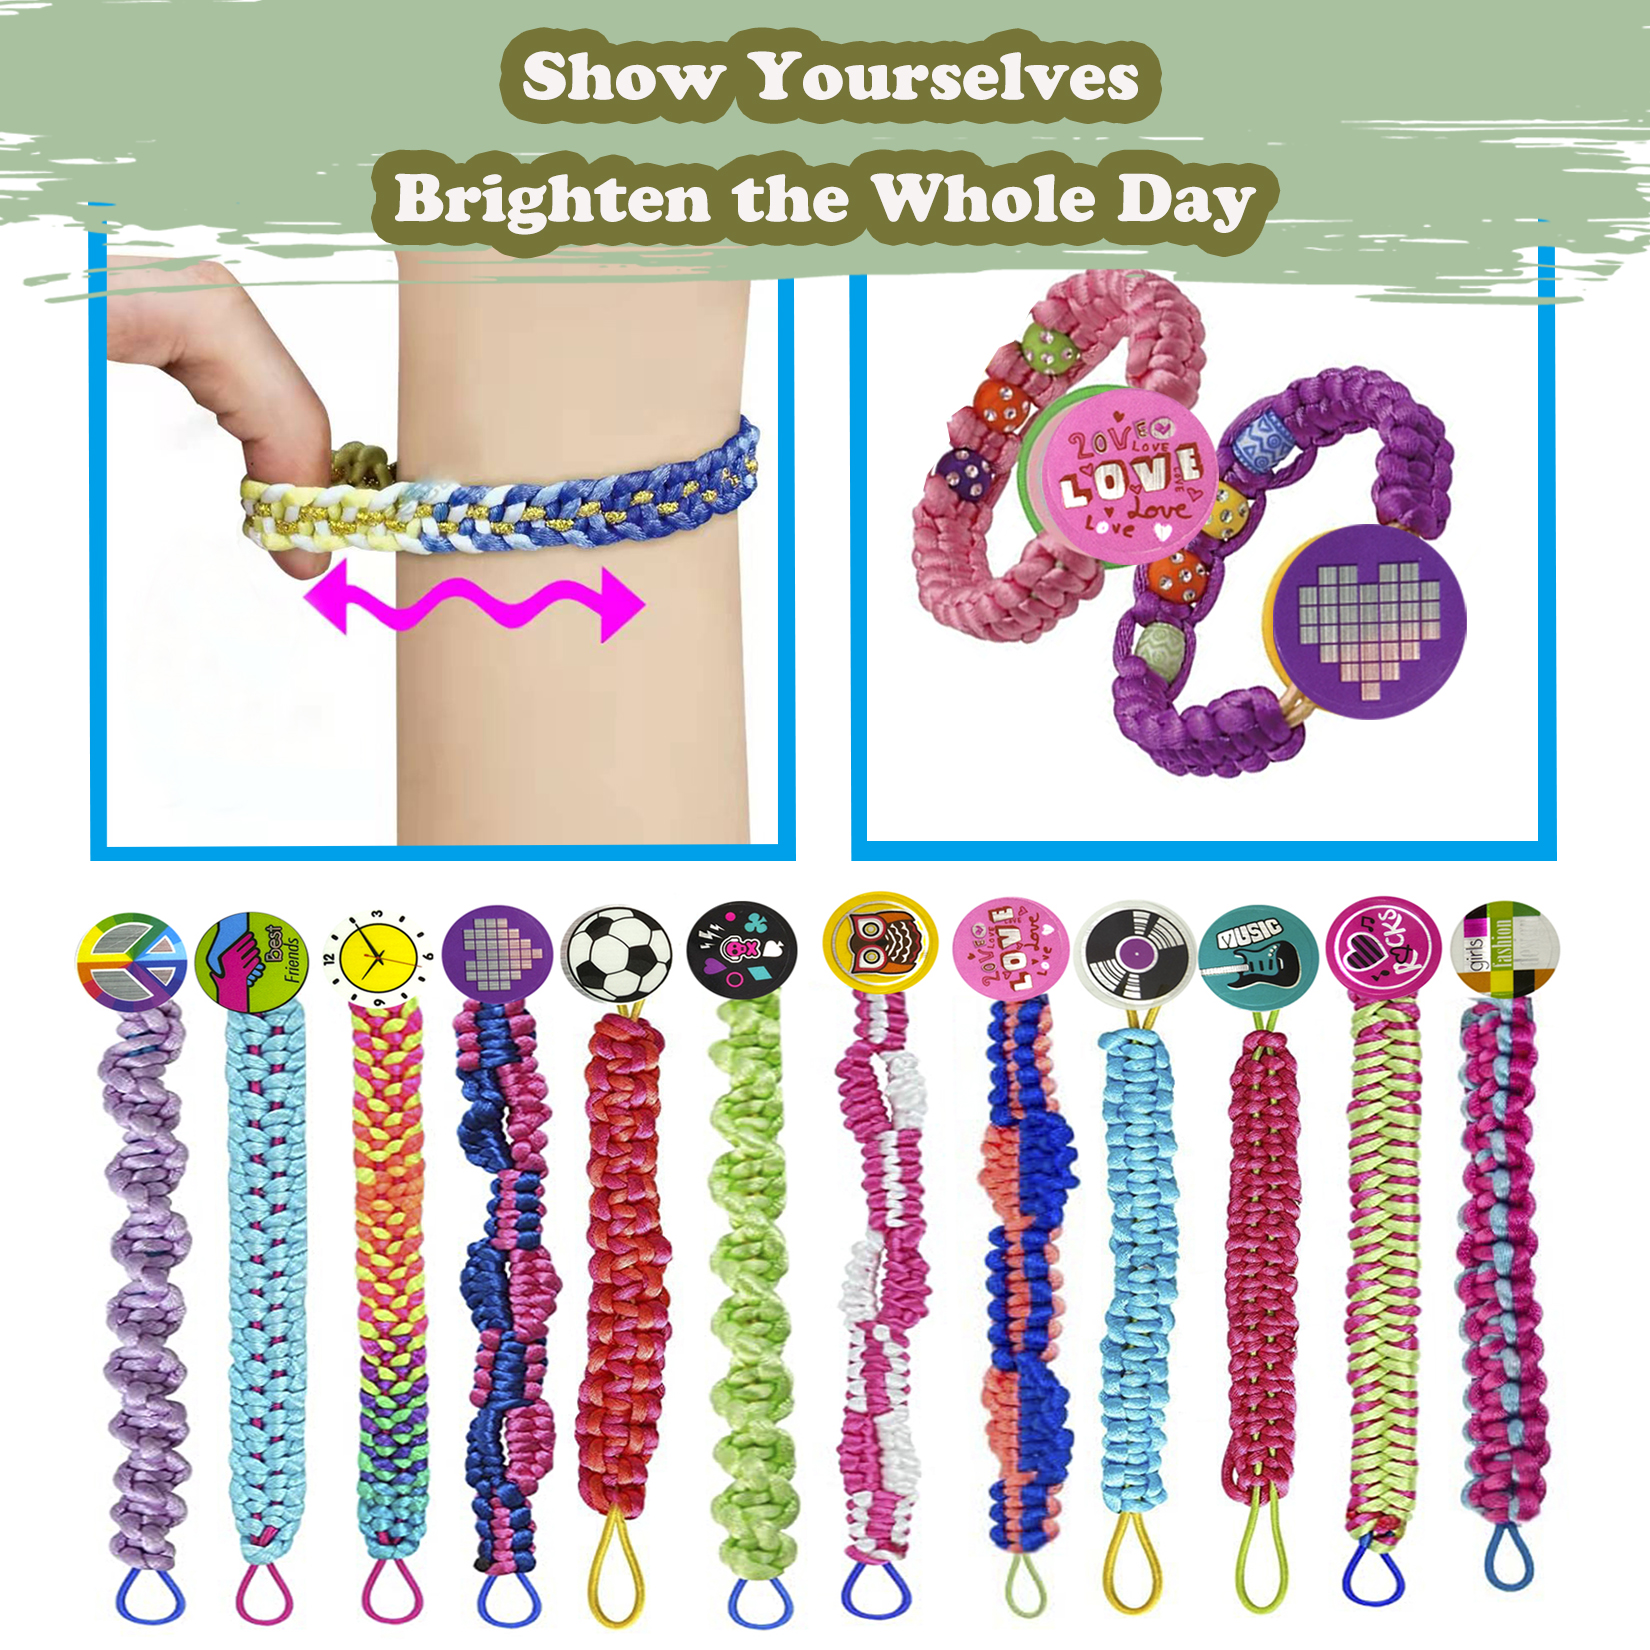 Bracelet Making Kit, Kids Loom Friendship Bracelets Maker Crafts Toys for Age 6 7 8 9 10 11 12 Year Old Girls Gift Birthday Christmas Gifts for 6-12 Year Olds Girl Teen Travel Activity Set - image 5 of 7